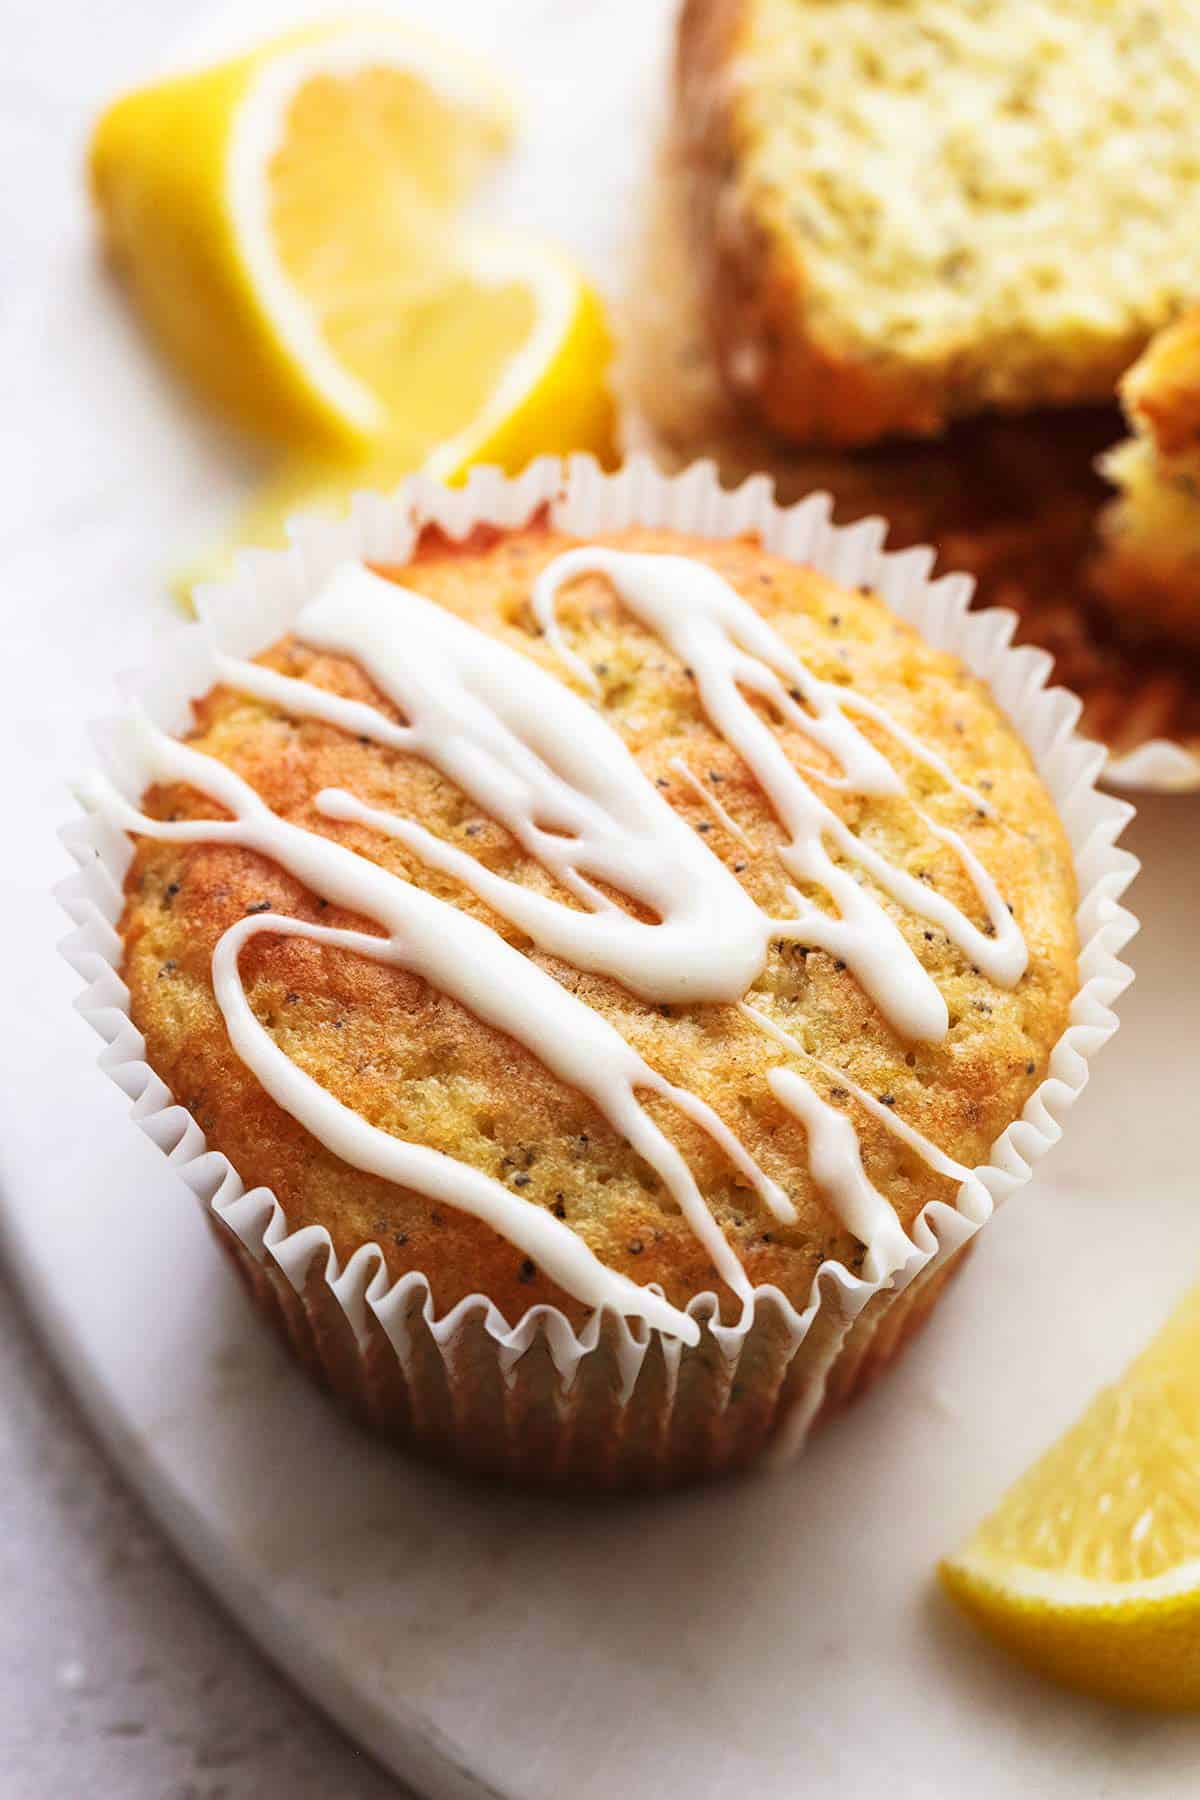 close up of a lemon poppyseed muffin with glaze and lemon wedges on the side.